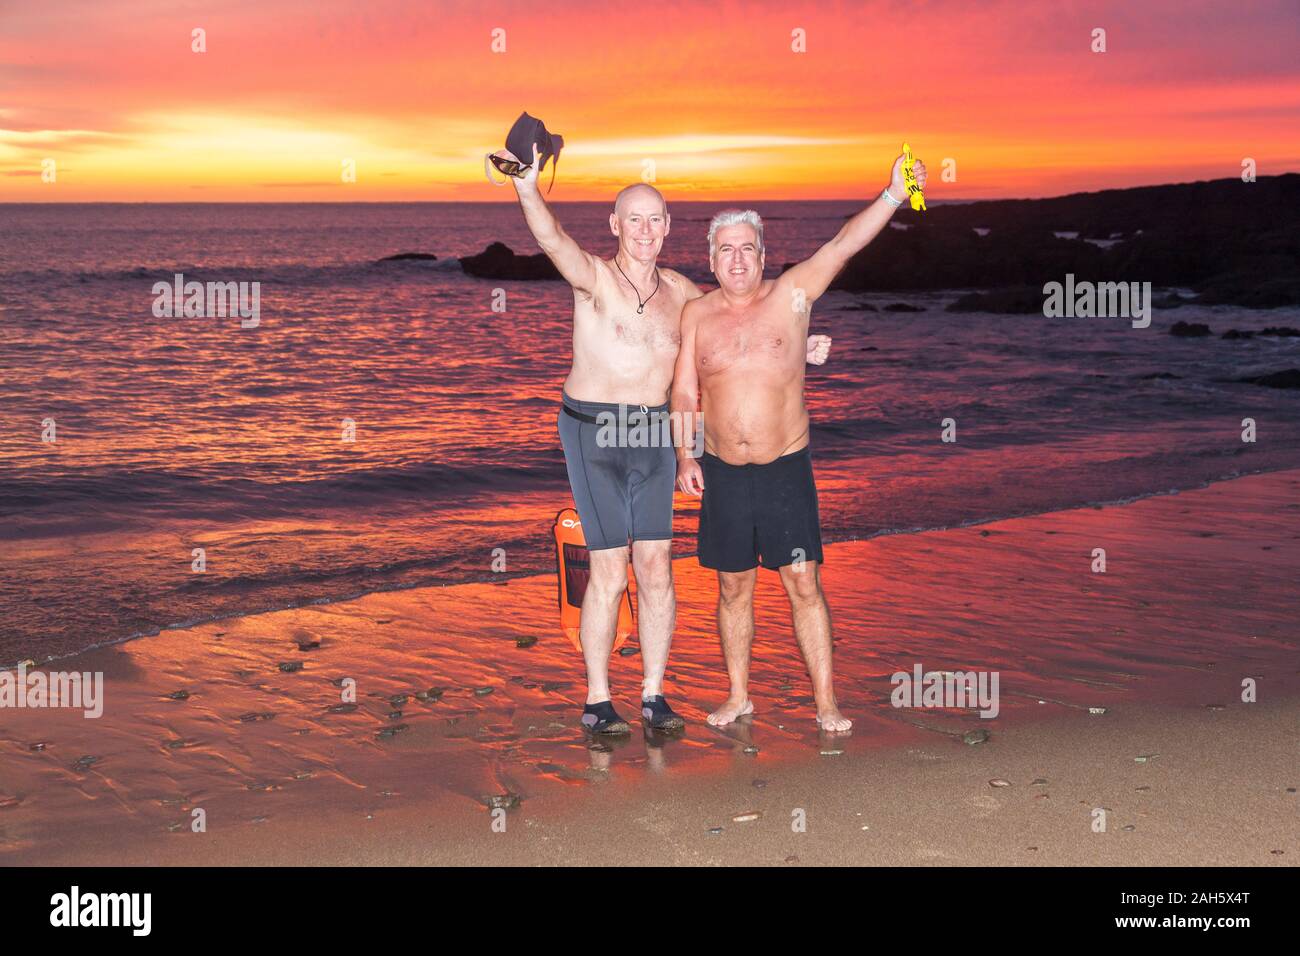 Myrtleville, Cork, Ireland. 25th December, 2019. Michael Looney, Kerry Pike and John Sisk, Tivoli preparing to go in for an early morning Christmas Day swim before dawn at Myrtleville, Co. Cork, Ireland.- Credit; David Creedon / Alamy Live News Stock Photo